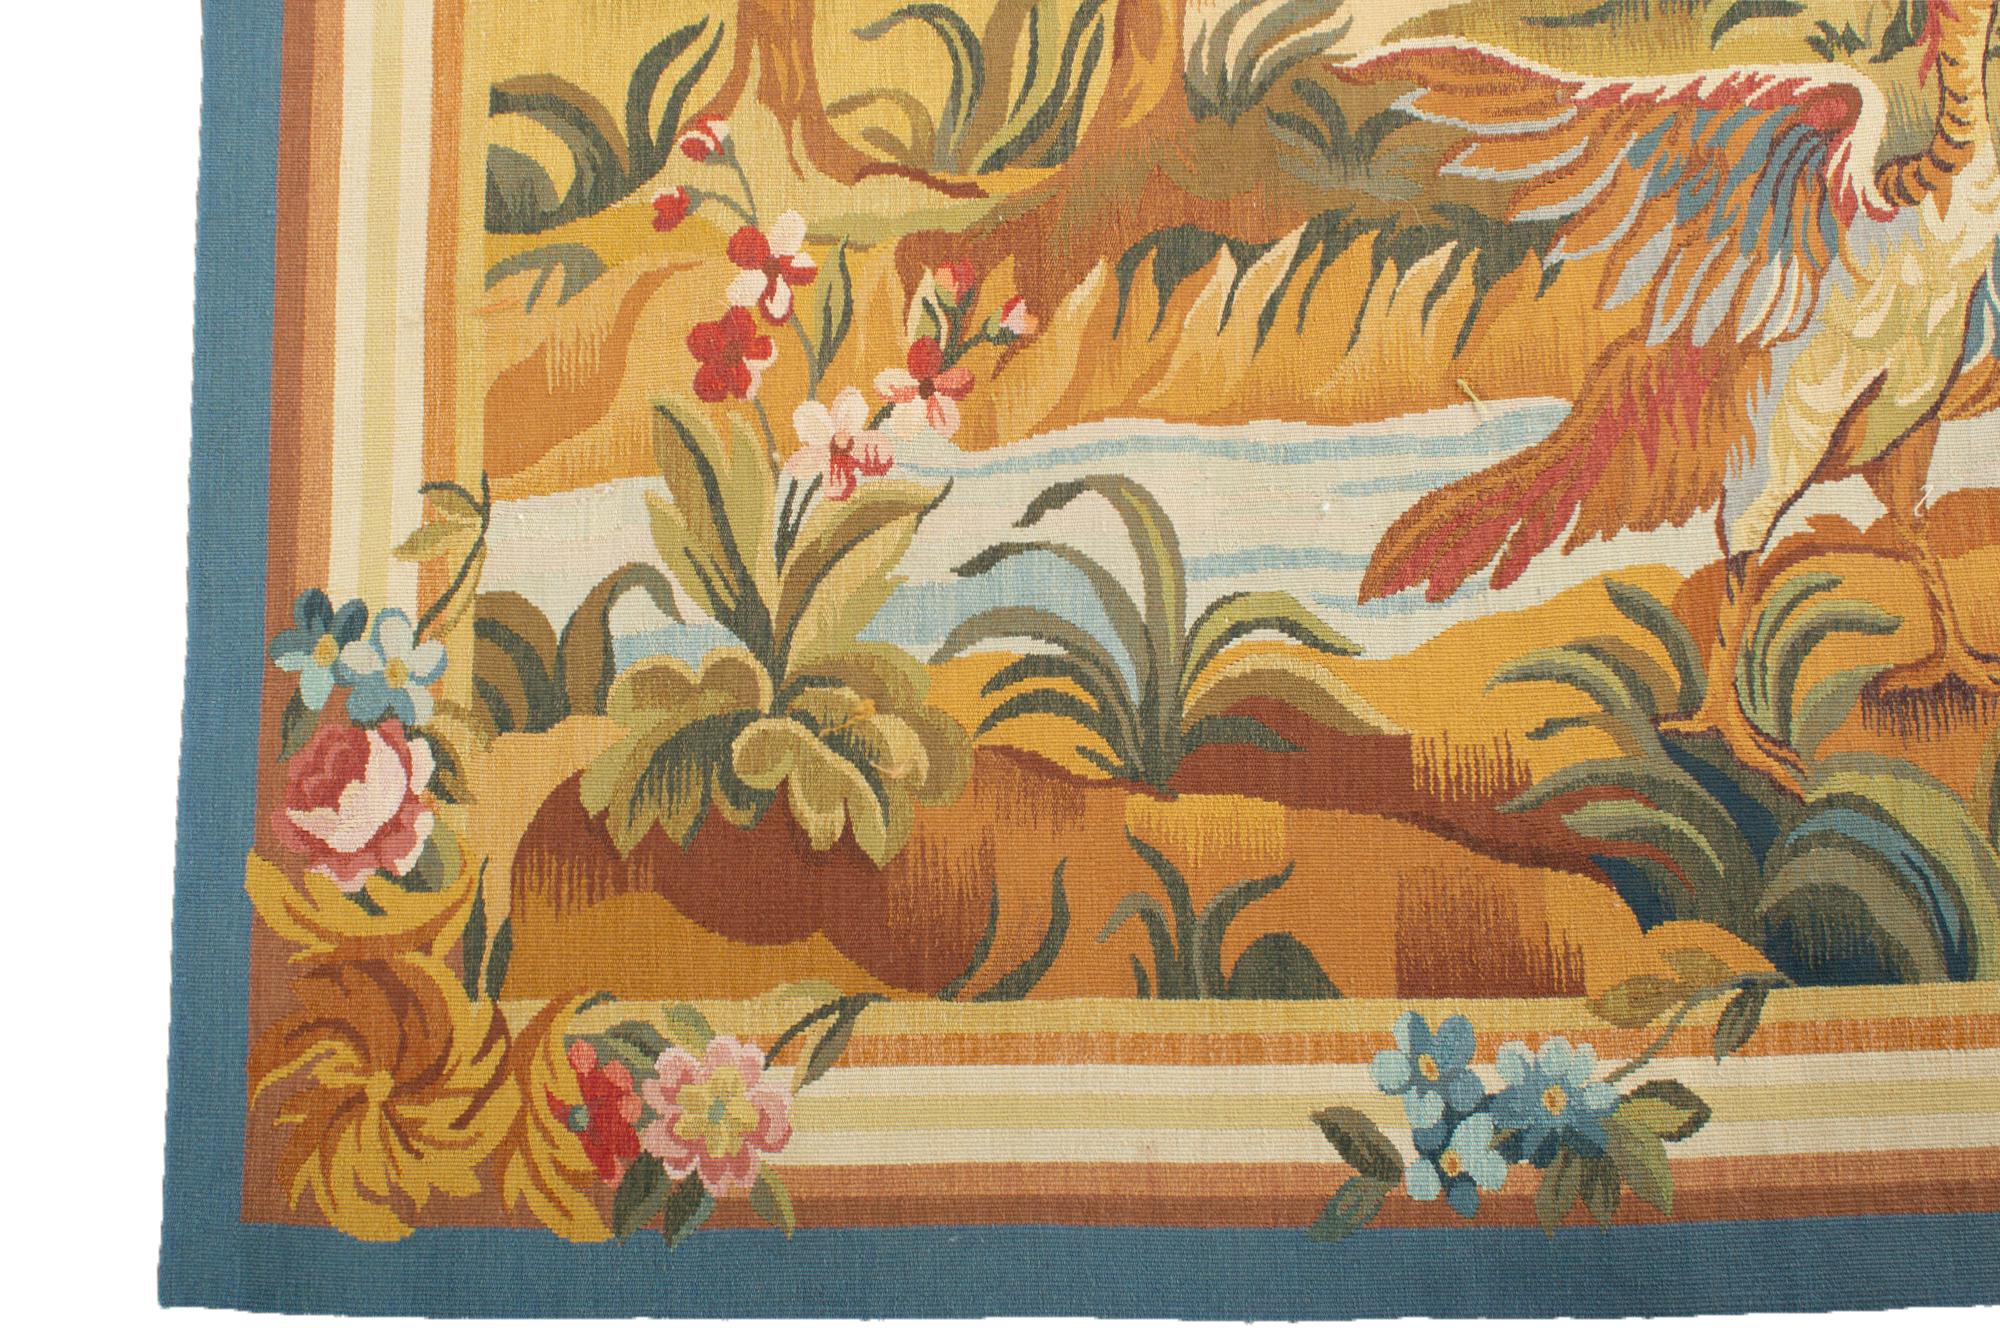 French 19th century style landscape tapestry. In the style of a French 19th century landscape tapestry with exotic birds, ducks and a stream. With a chateau in the background to complete this perfect picture of a country scene. Measures: 5' x 7'2